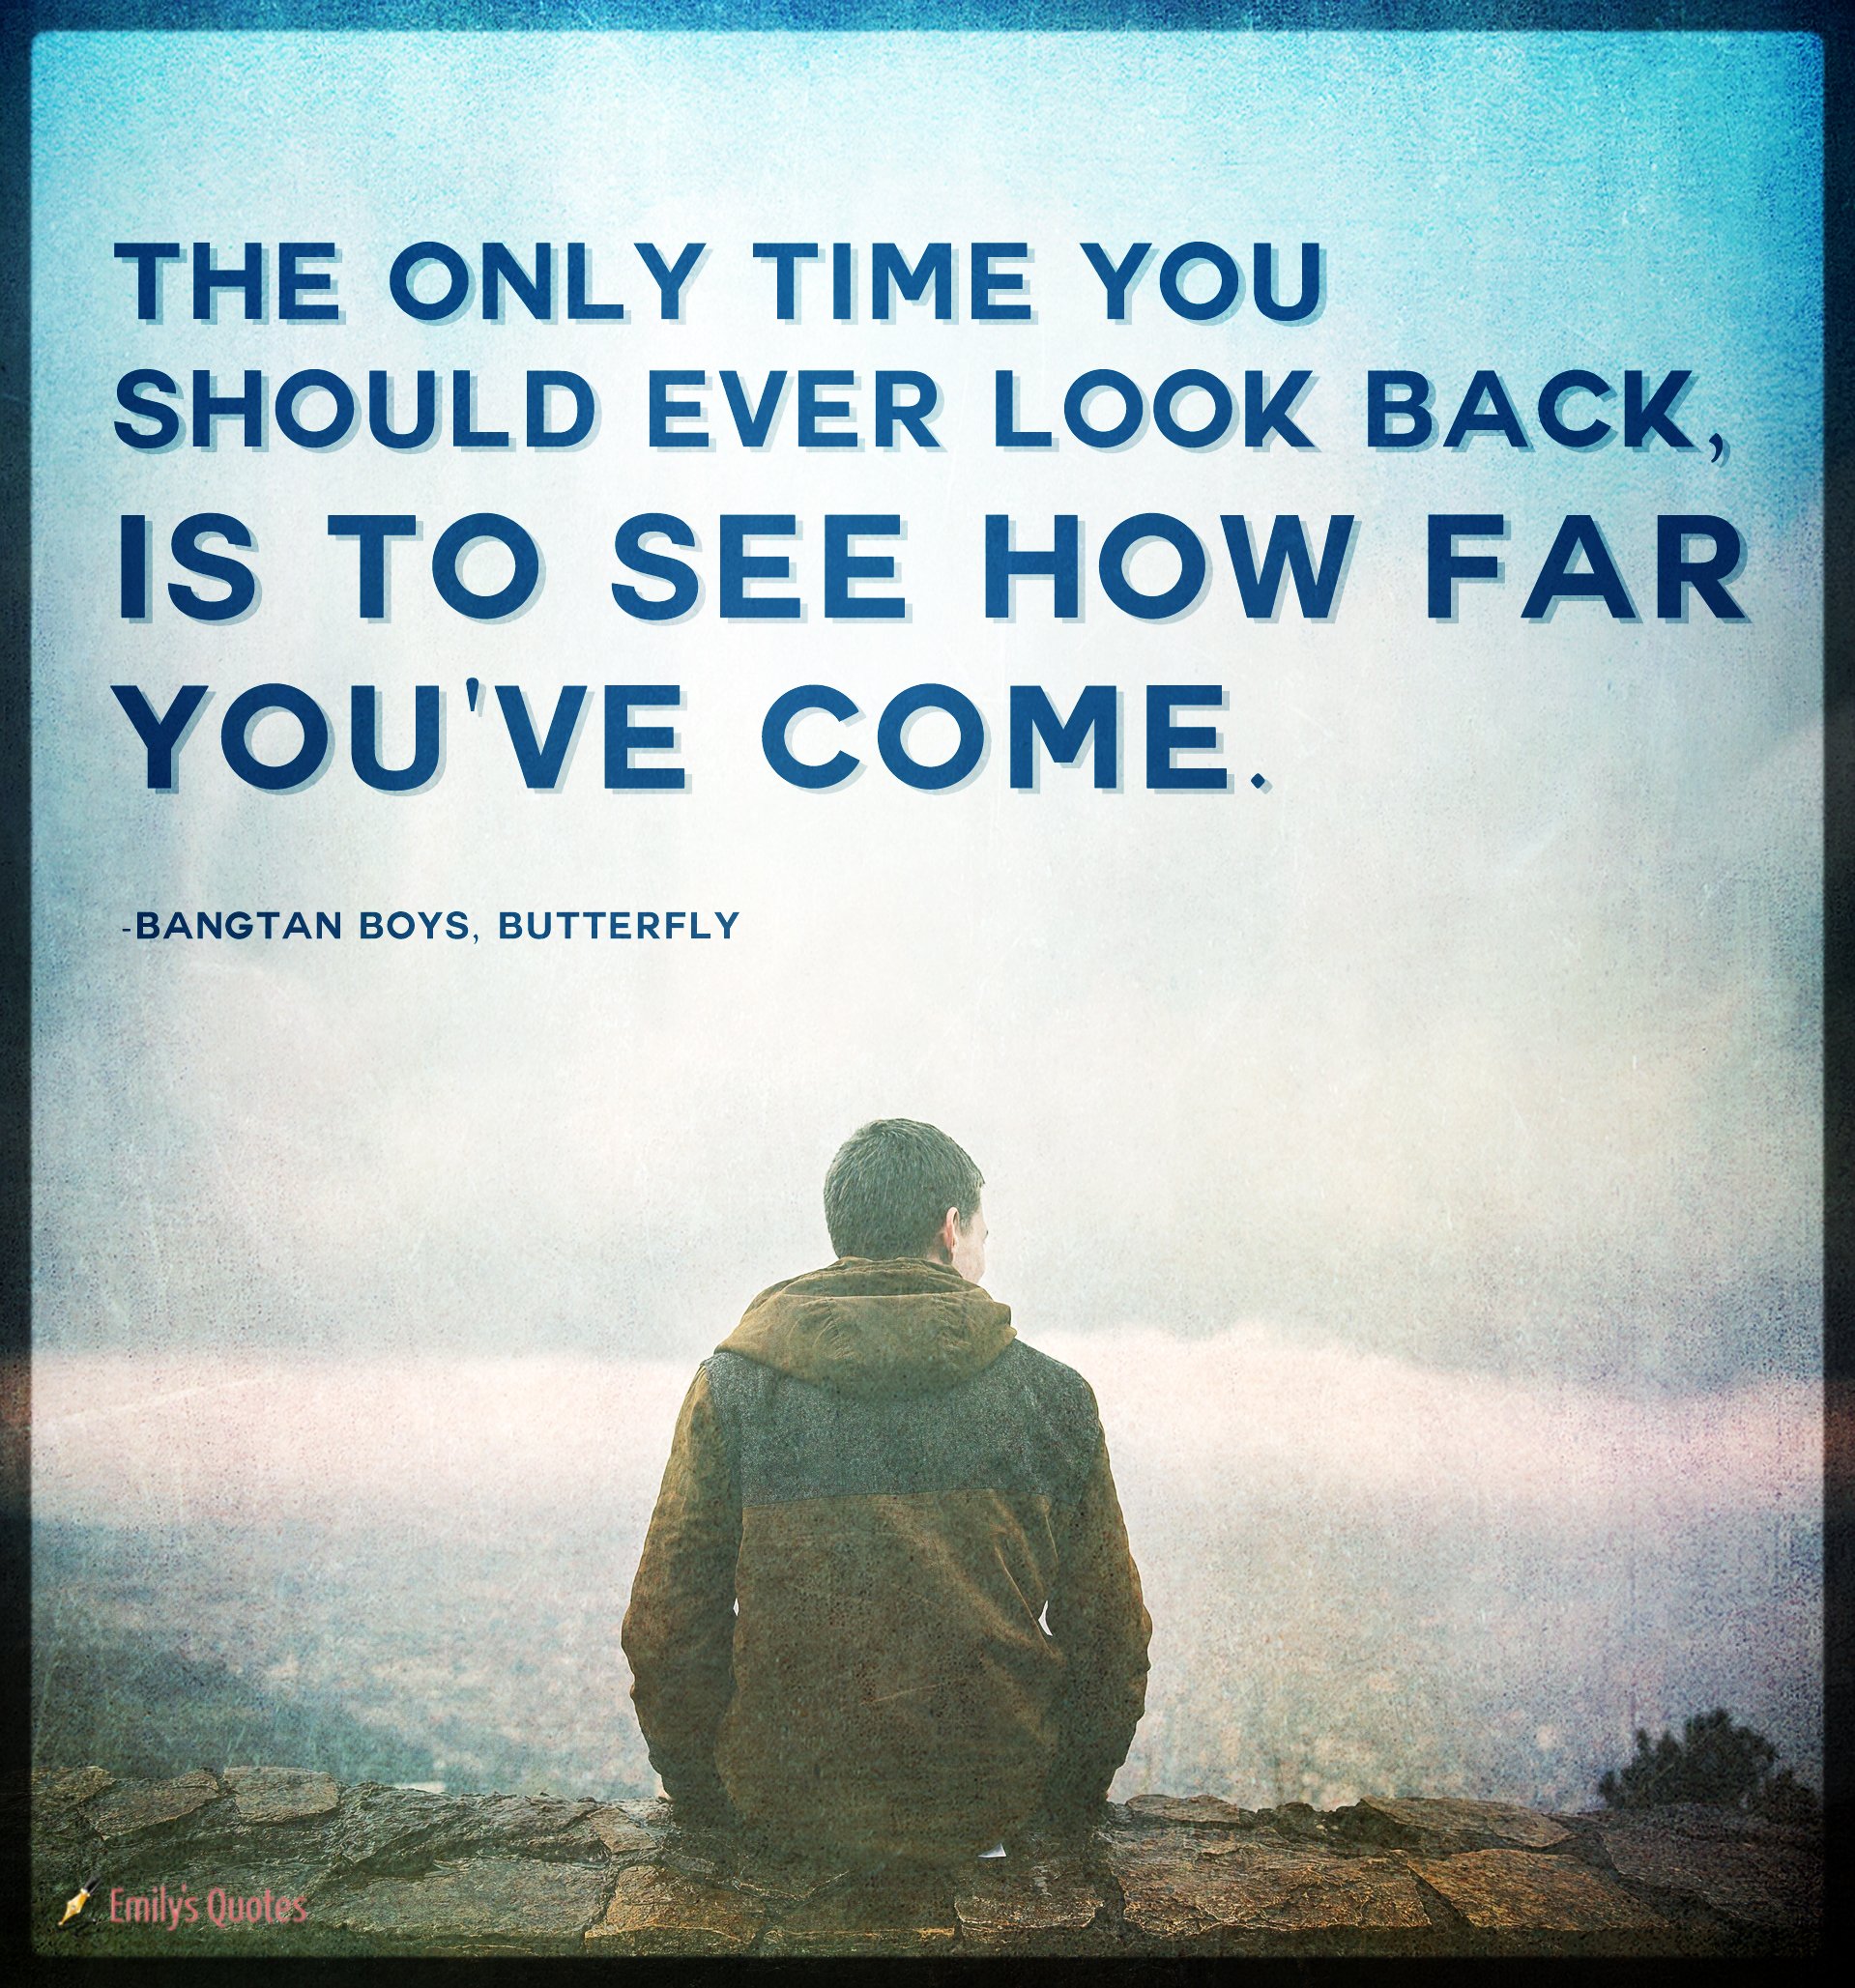 The only time you should ever look back, is to see how far you've come